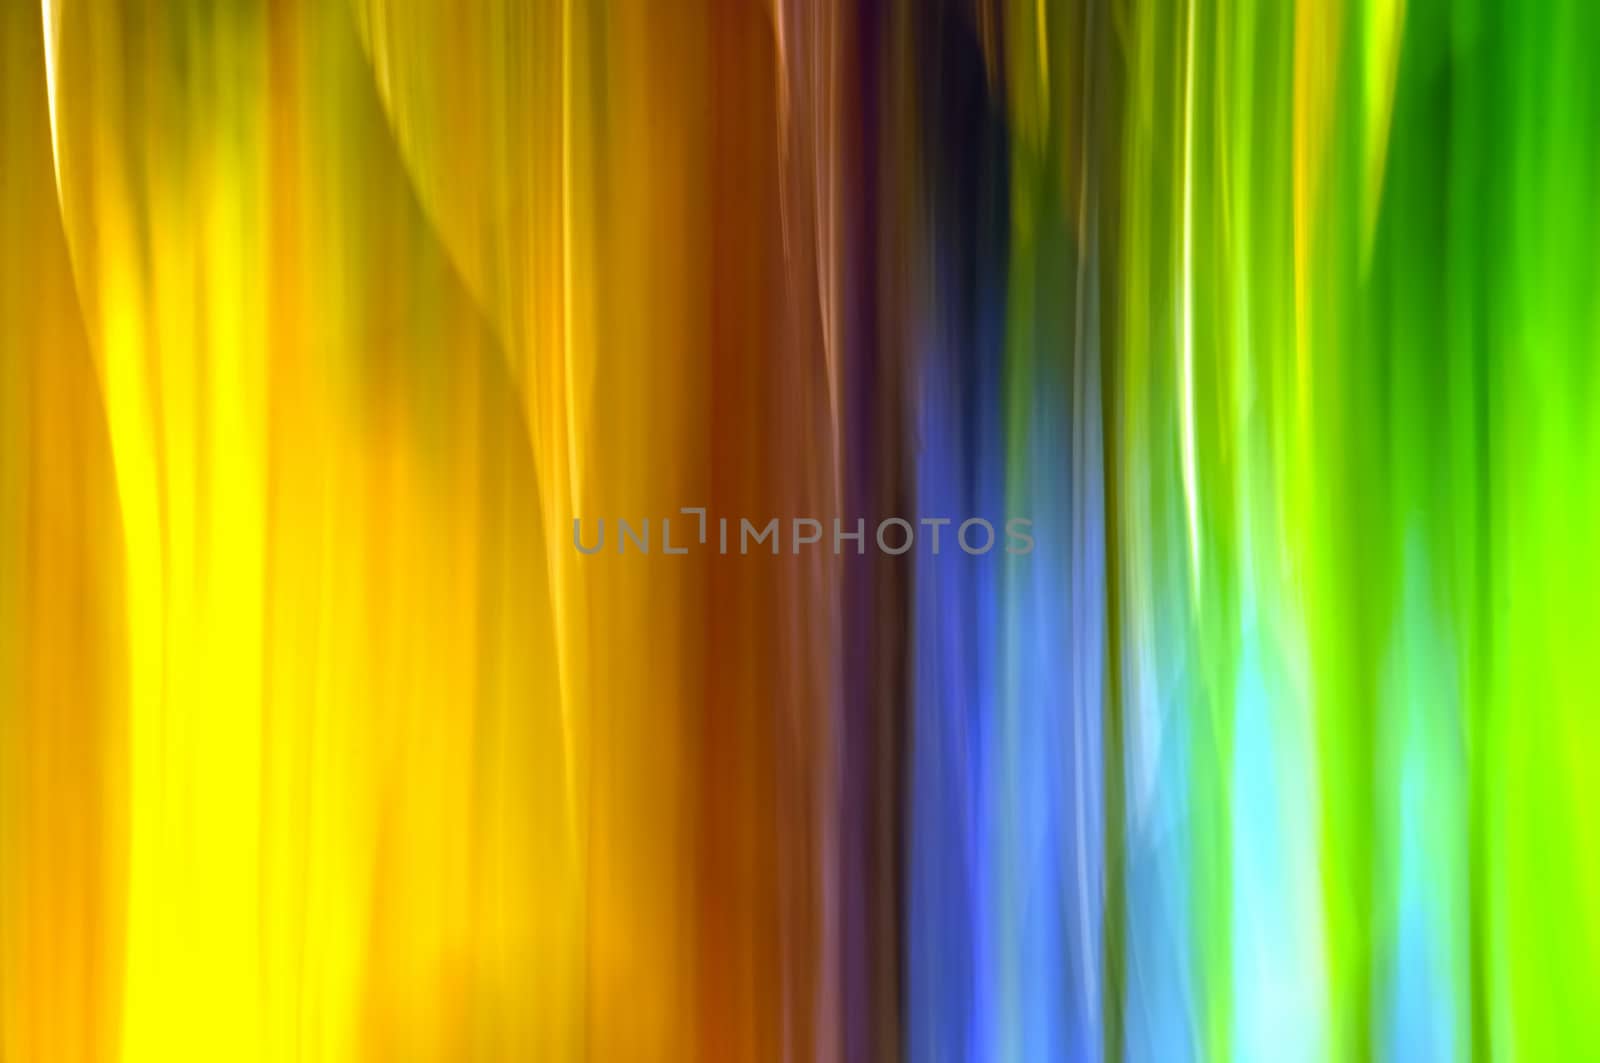 abstract image with color and light in vertical lines